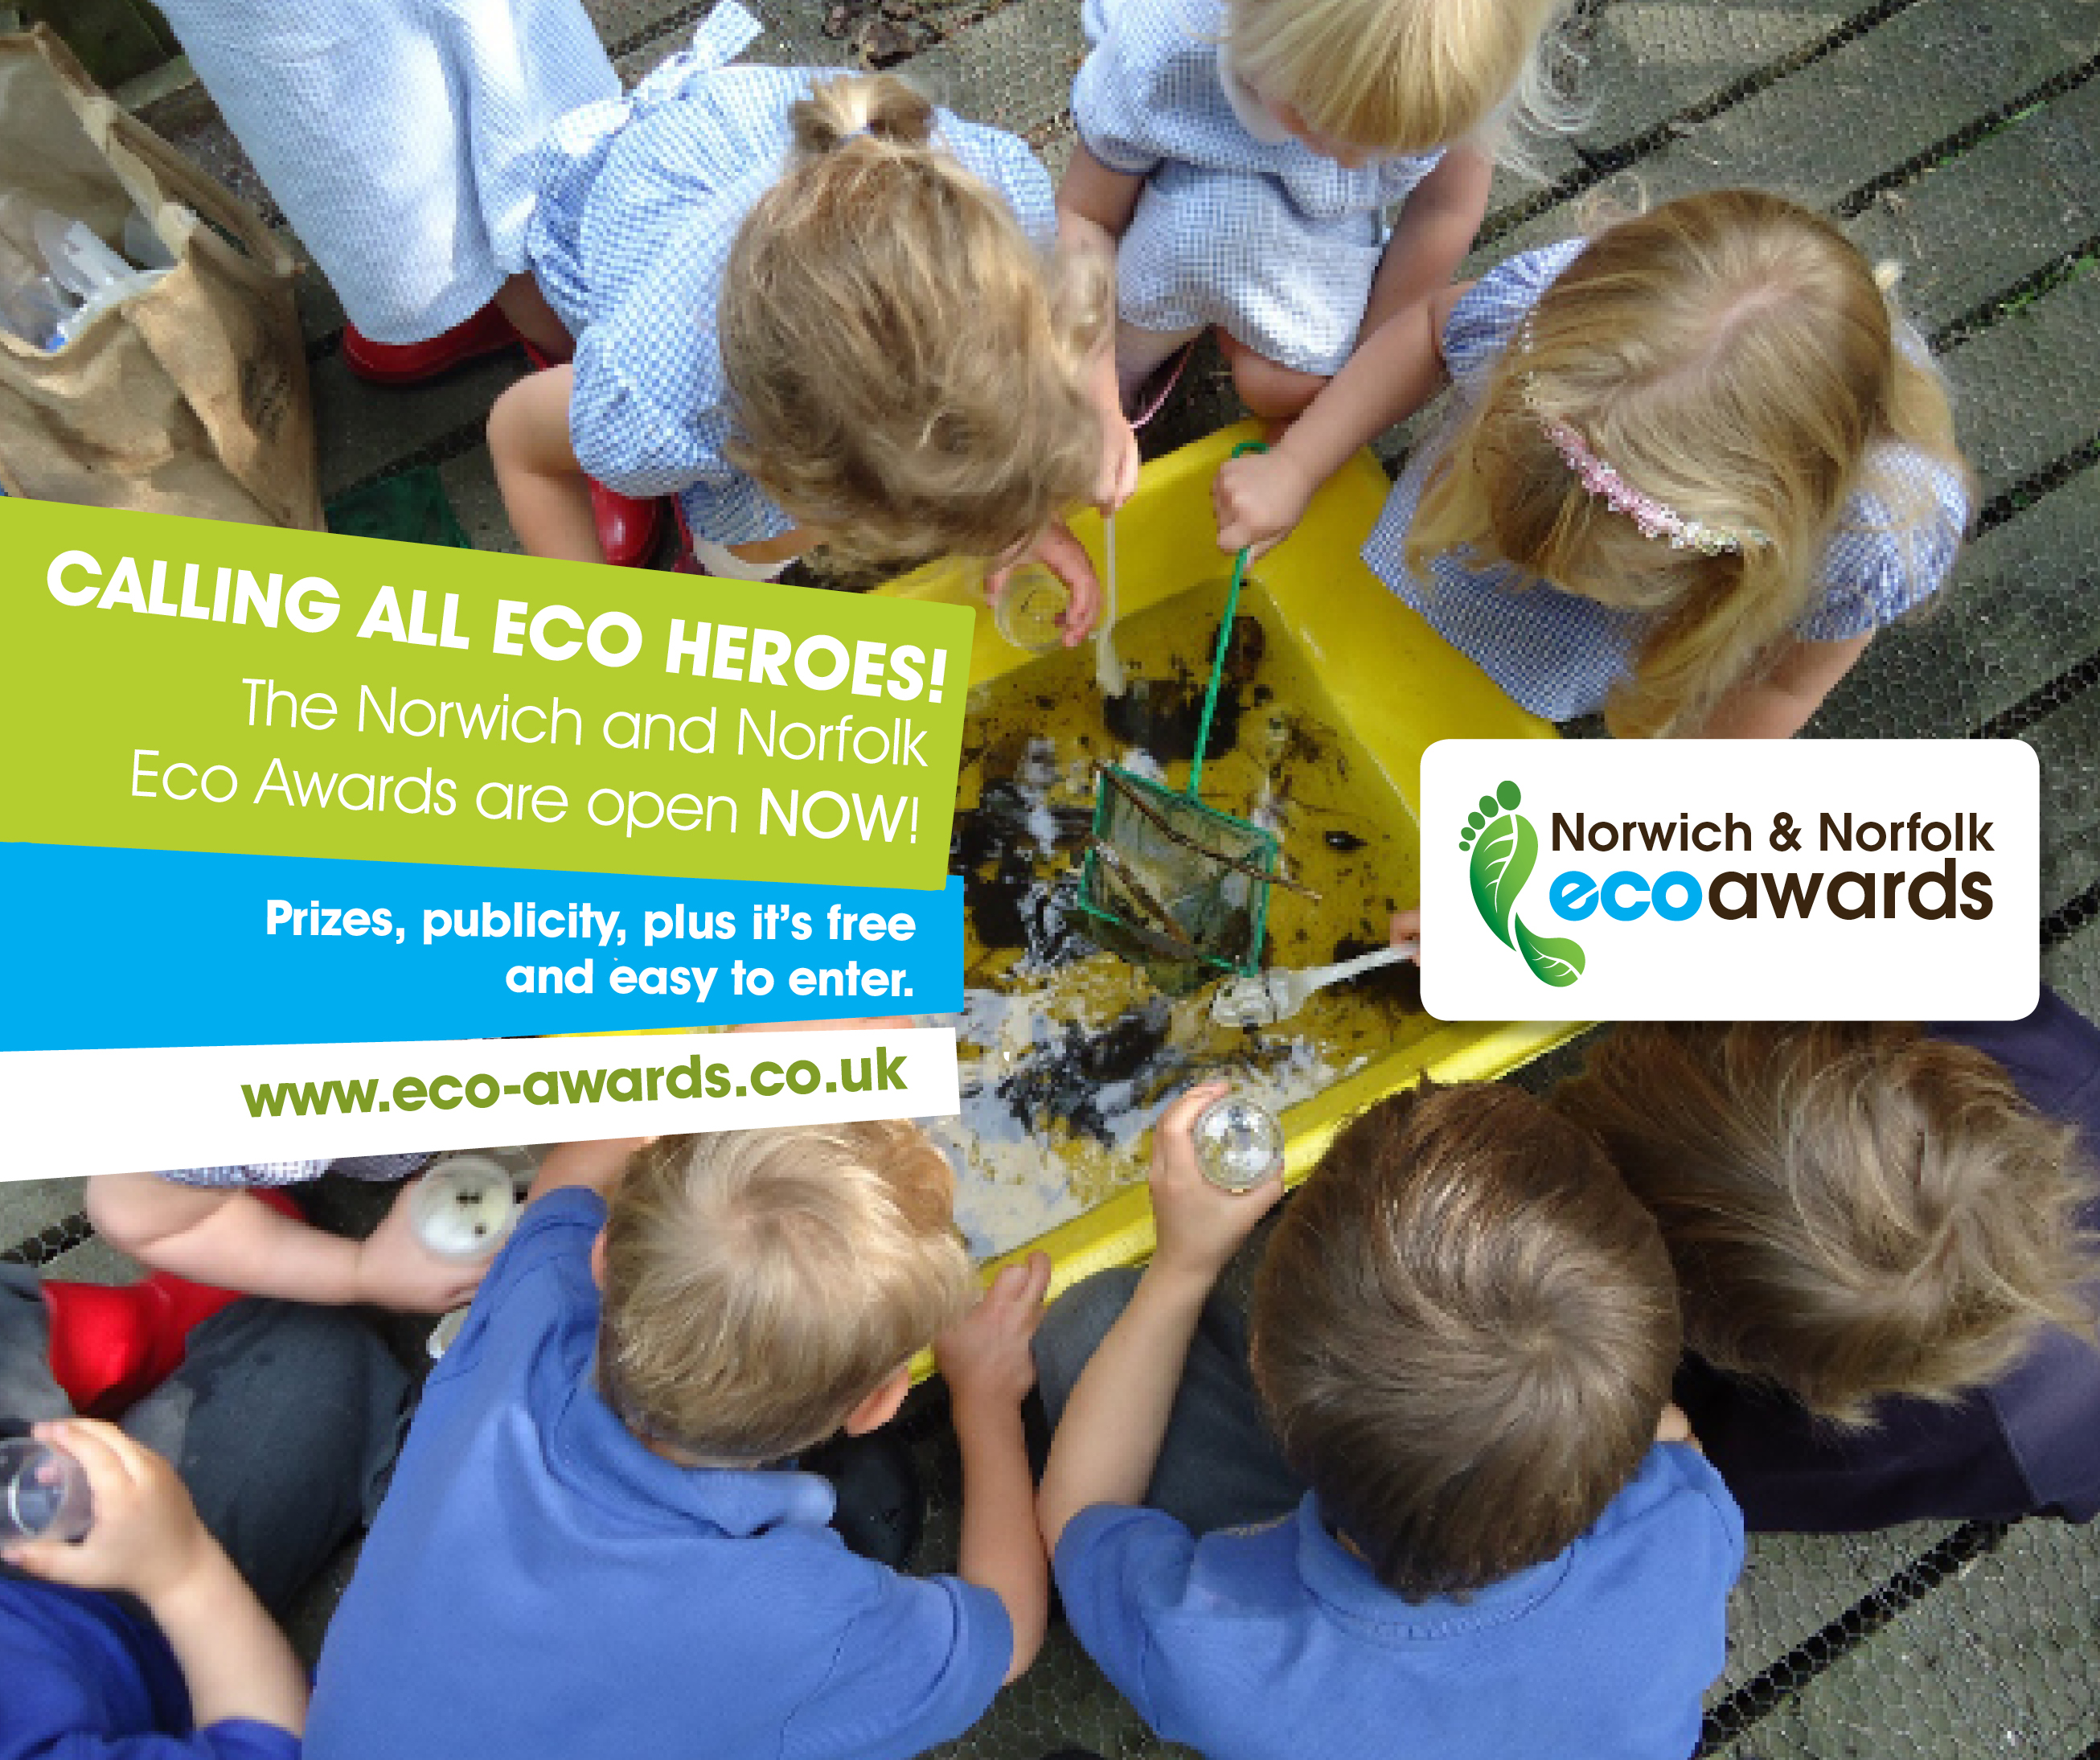 Norwich and Norfolk Eco Awards 2018-19 are open for entries!